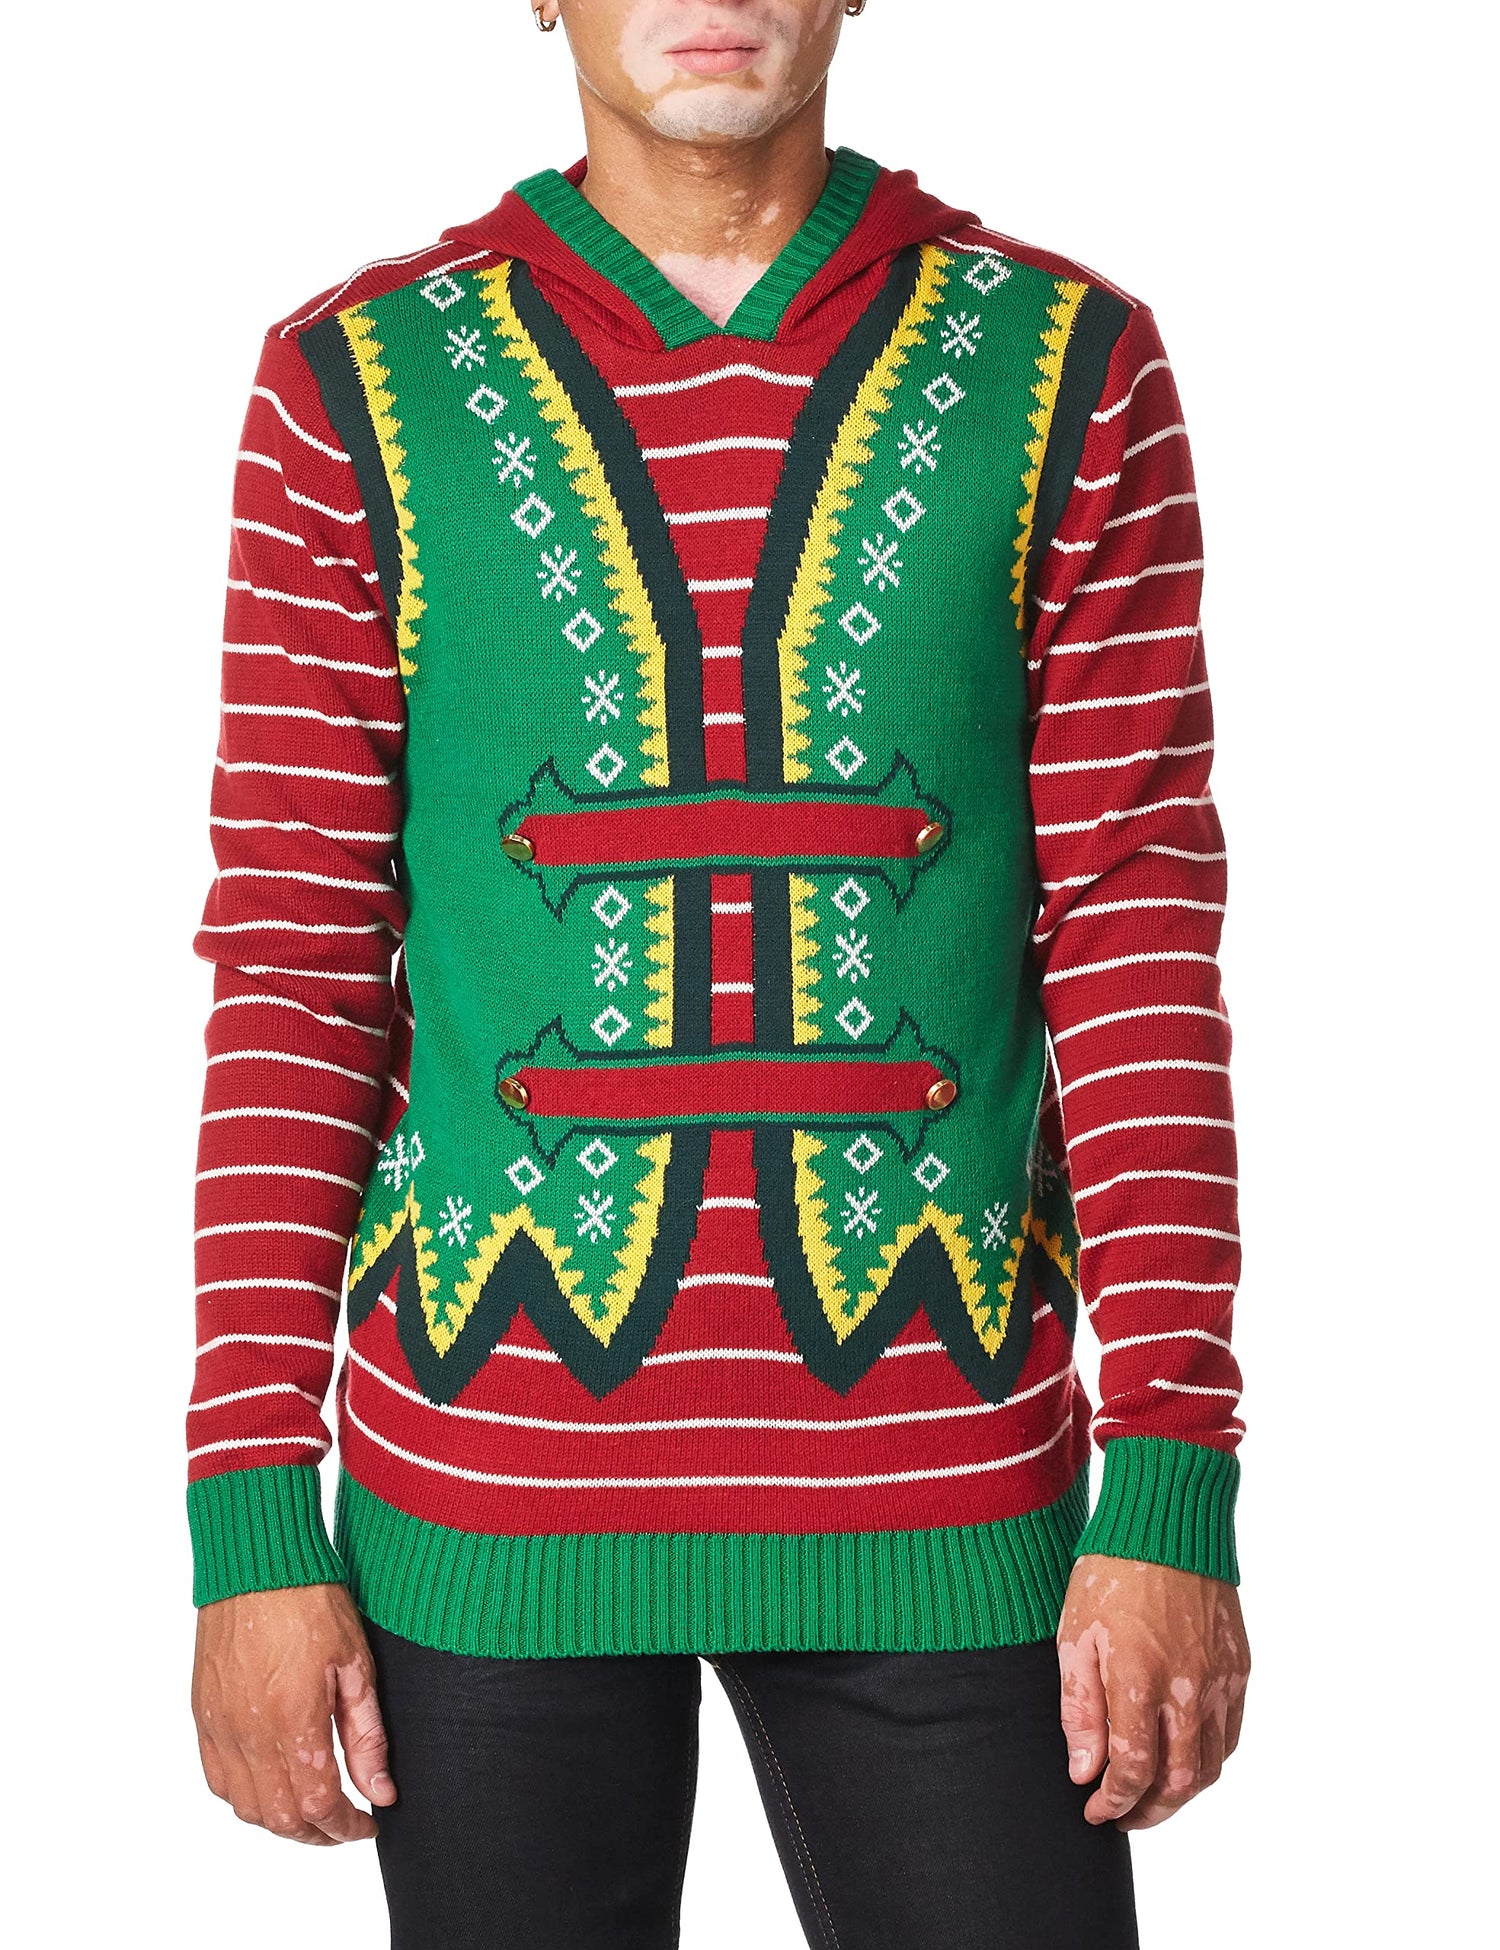 The Ugly Sweater Co. Mens Sz XL